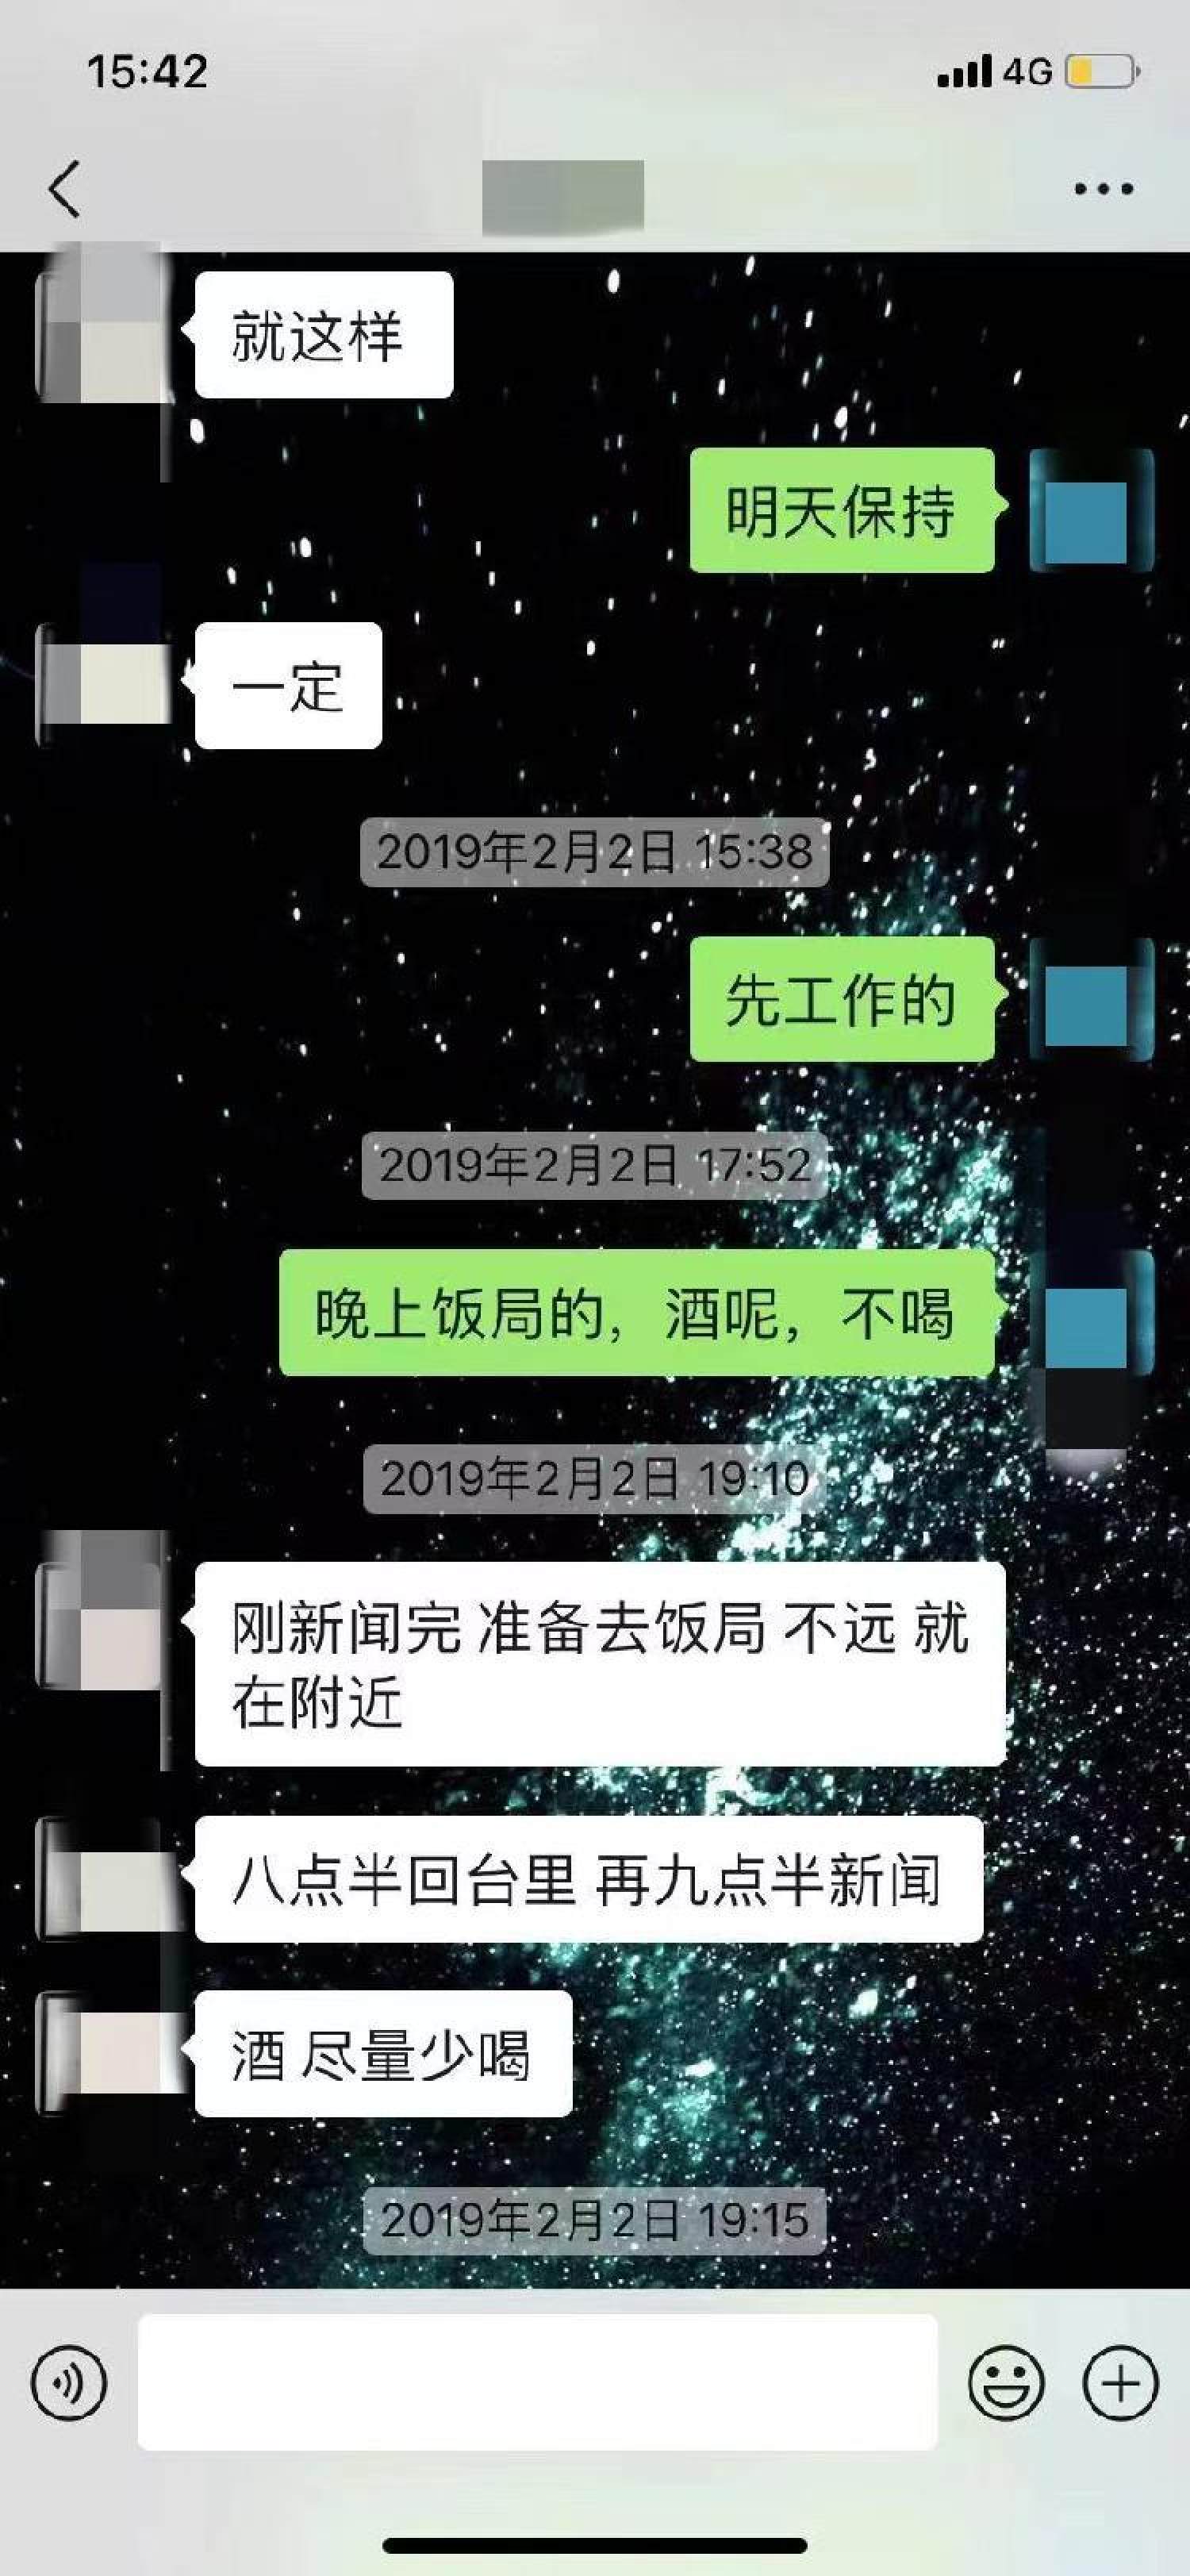 Chat interactions were integral to the US$287,000 online love scam perpetrated by an old friend of the victim. Photo: Weibo.